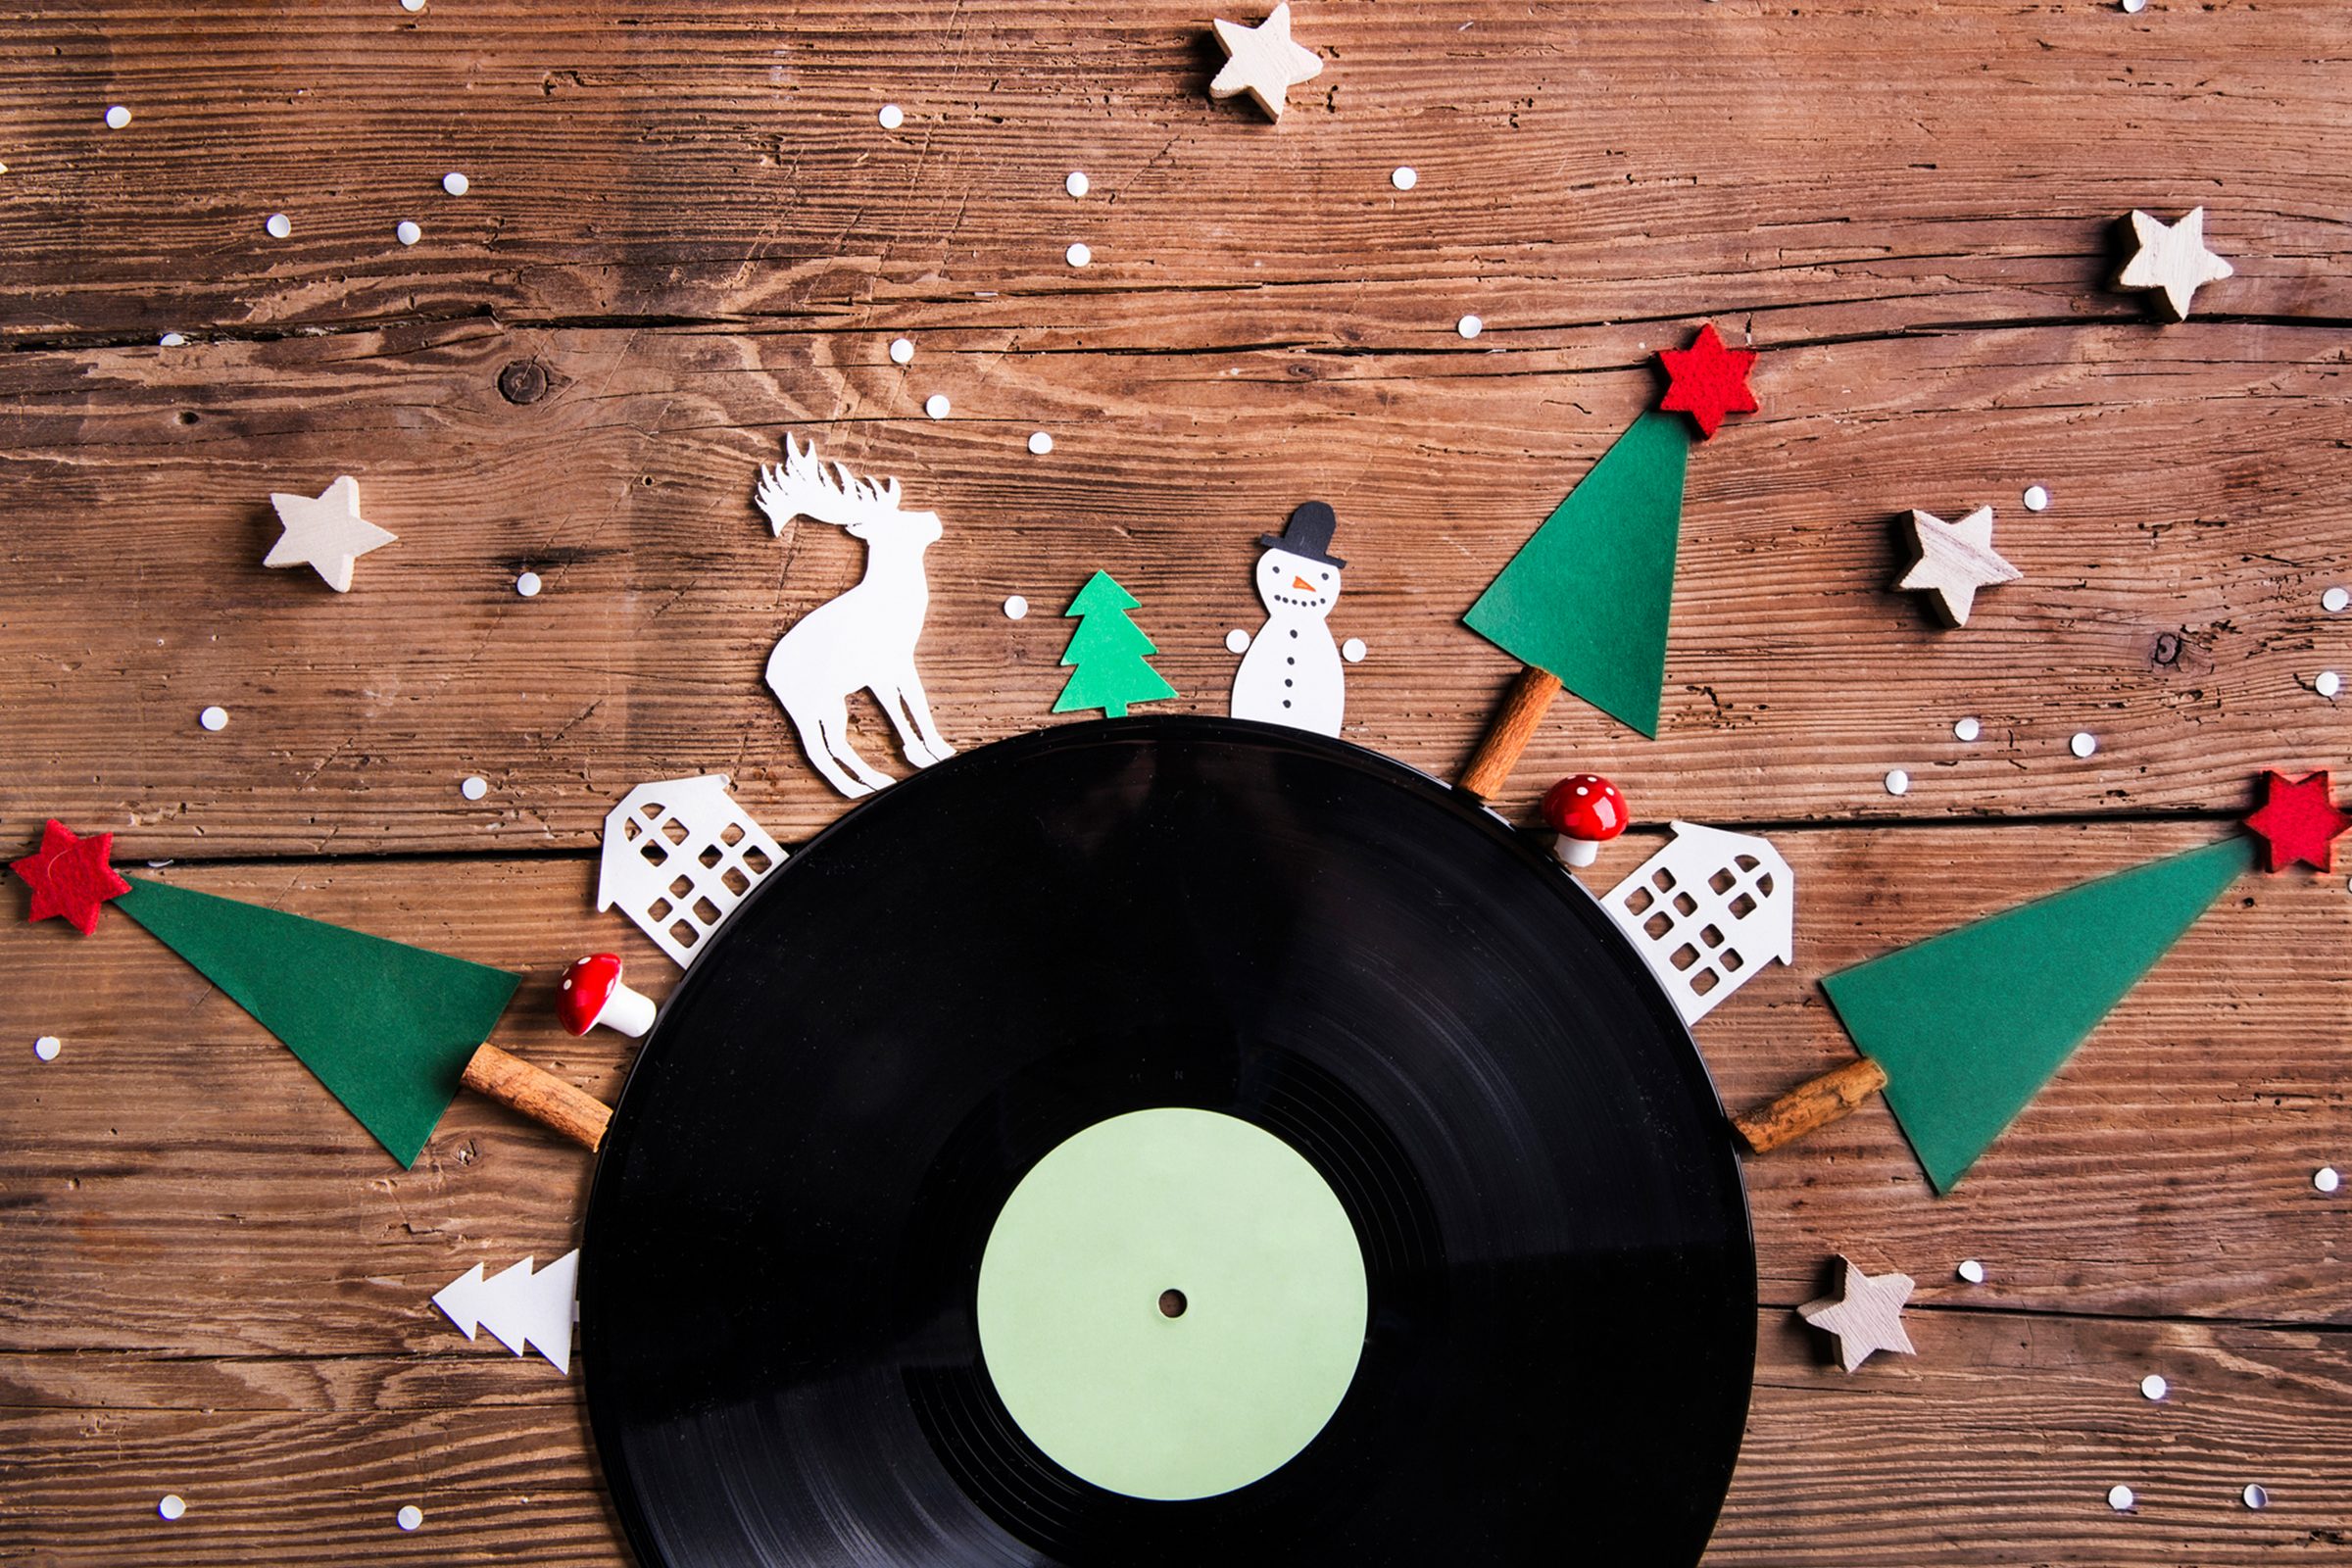 12 Memphis Holiday Songs to Get You in the Christmas Spirit